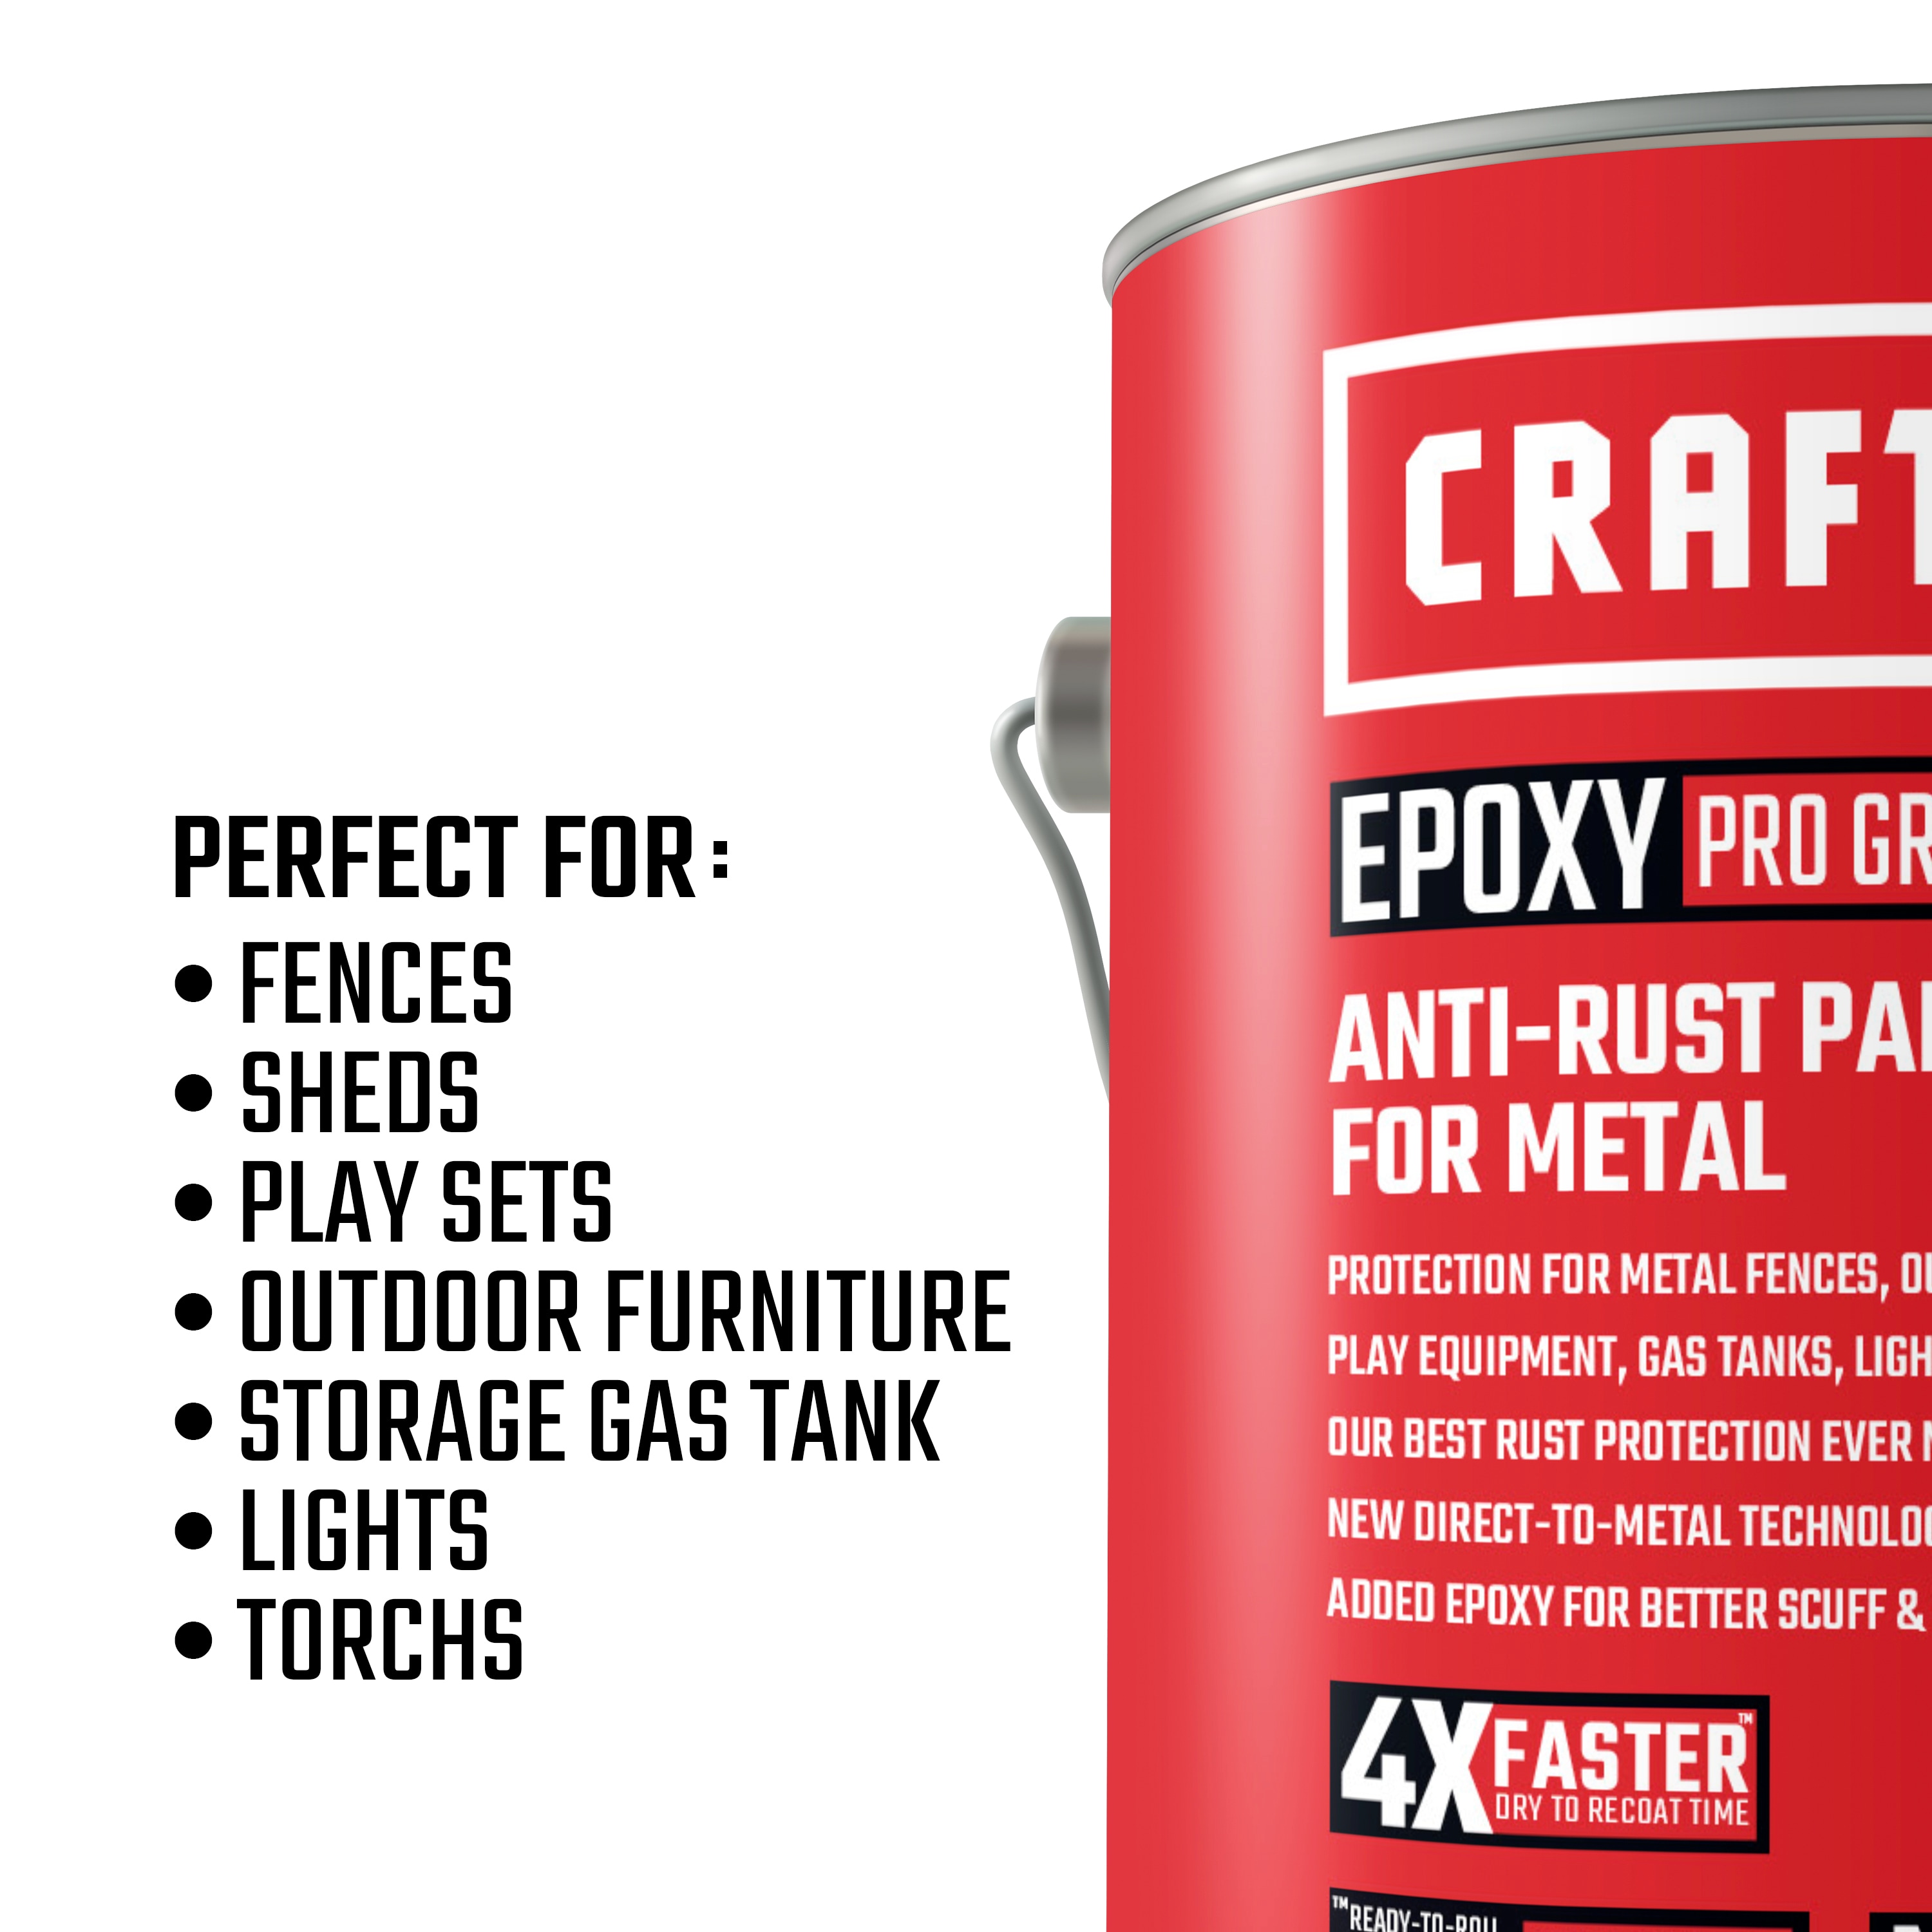 RustSeal - Rust Prevention - Stop Rust Paint - Frame Paint and Concrete  Sealer